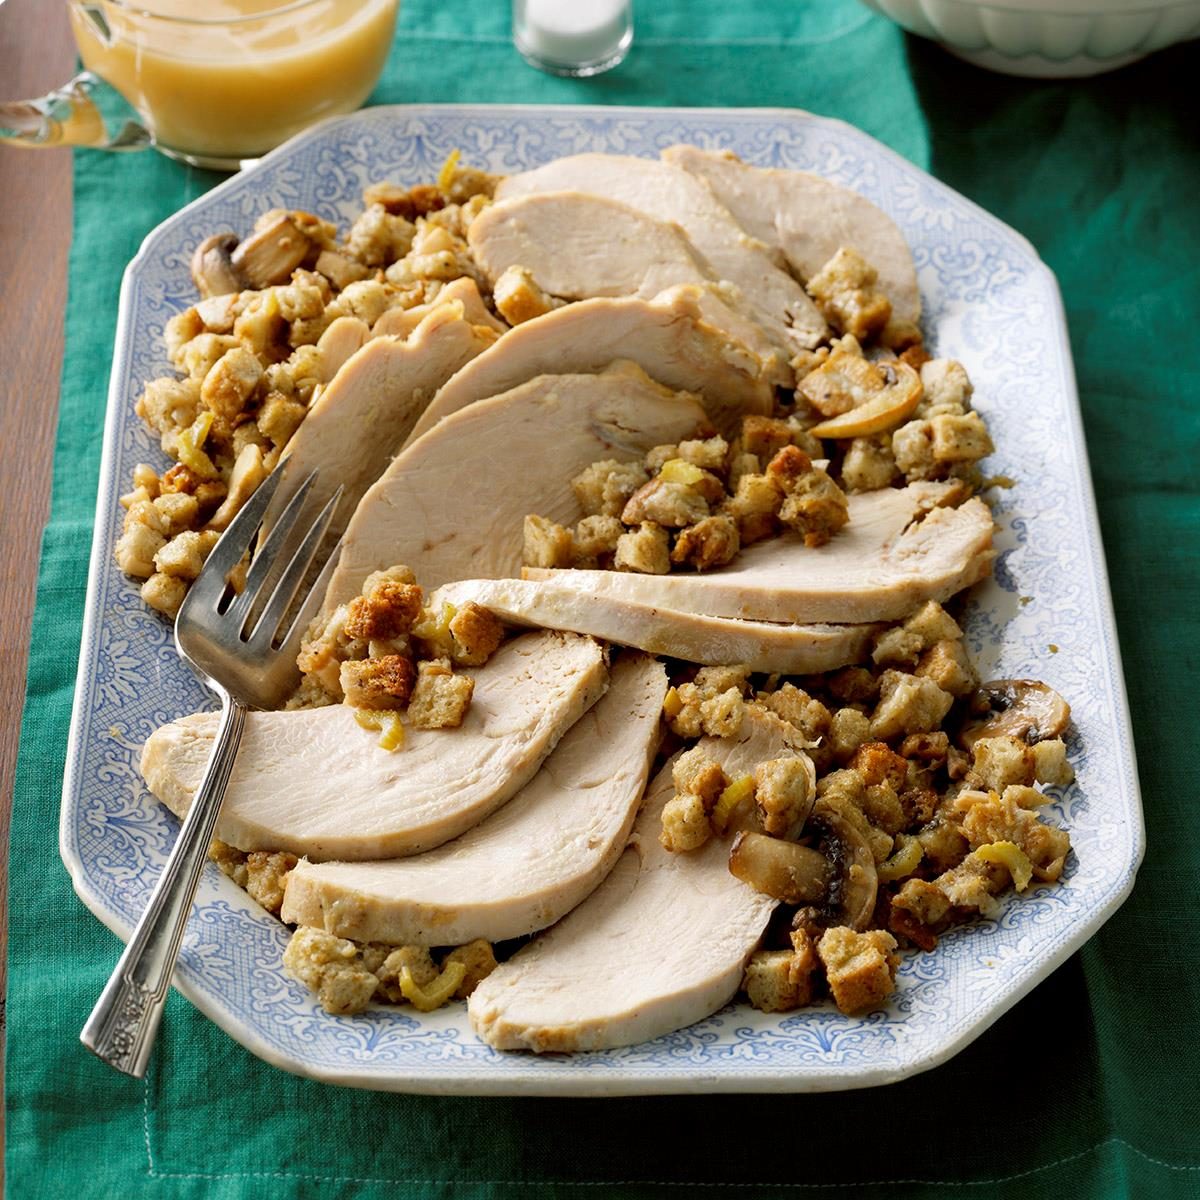 Slow-Cooked Turkey with Herbed Stuffing Recipe | Taste of Home